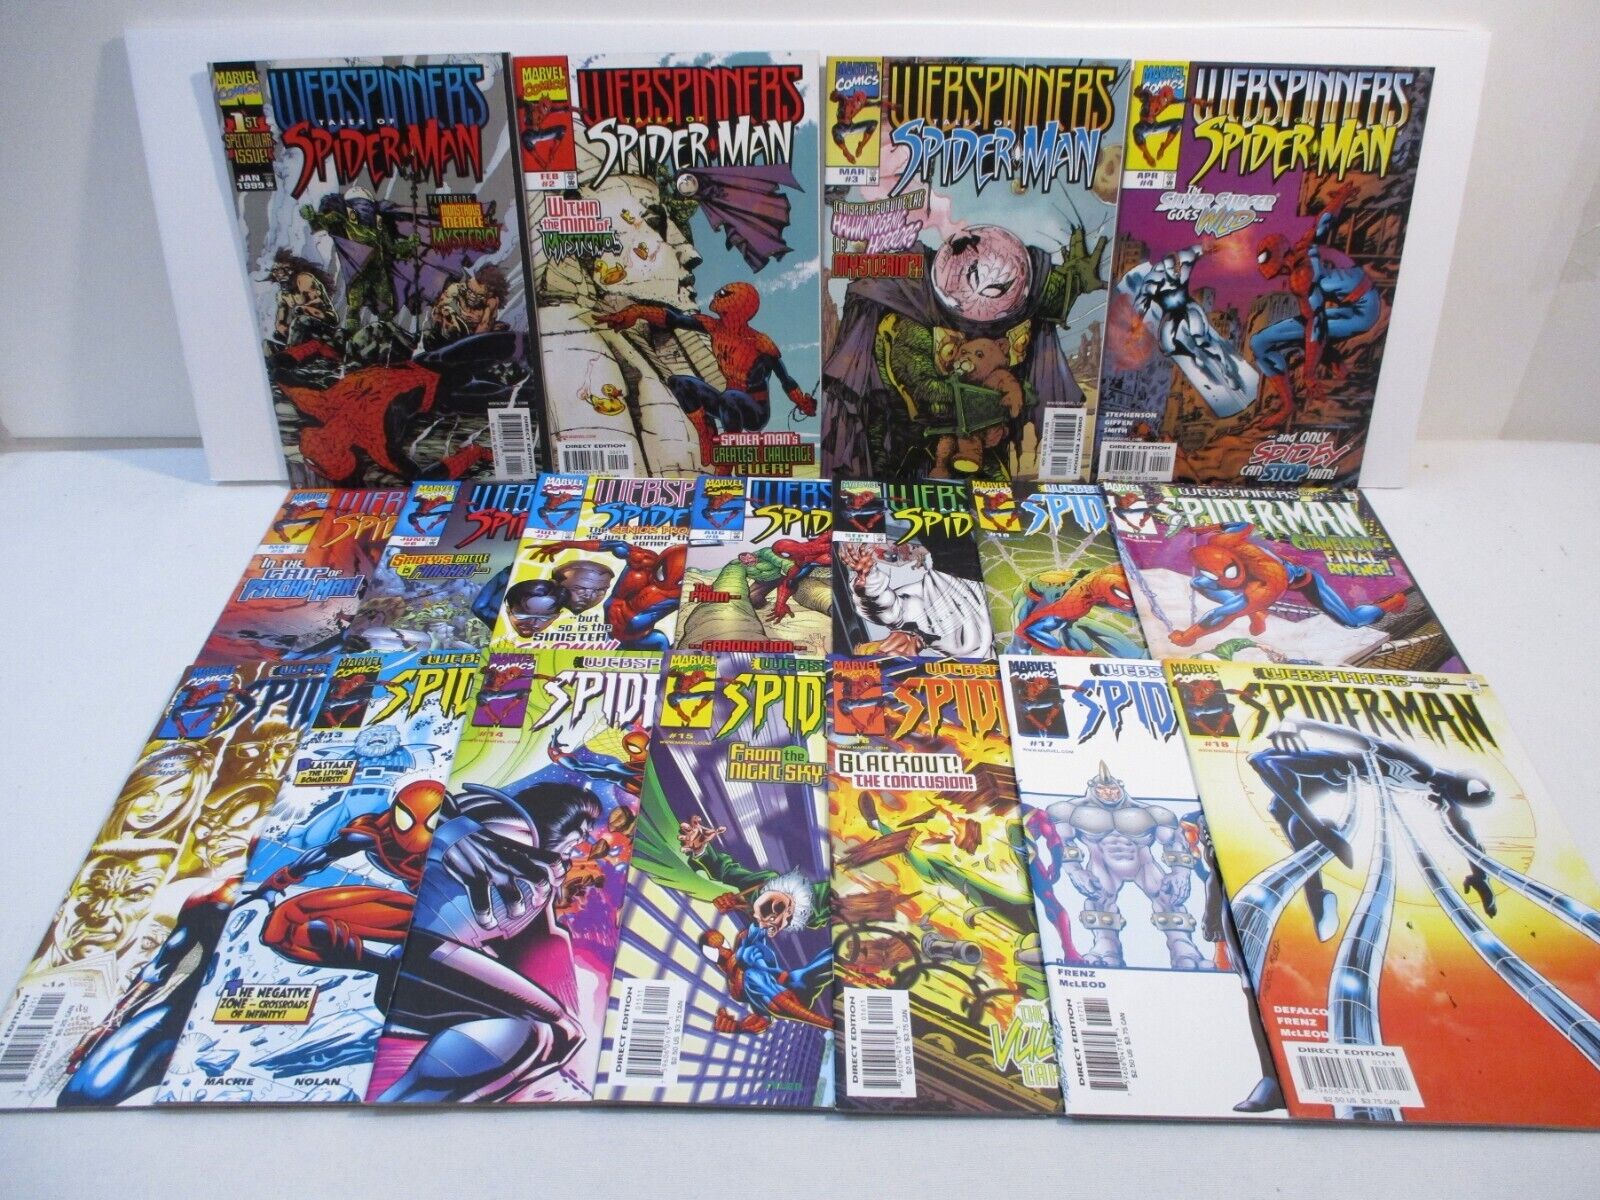 Webspinners Tales of Spider-Man #1-18 Complete Series - Marvel Comics 1999